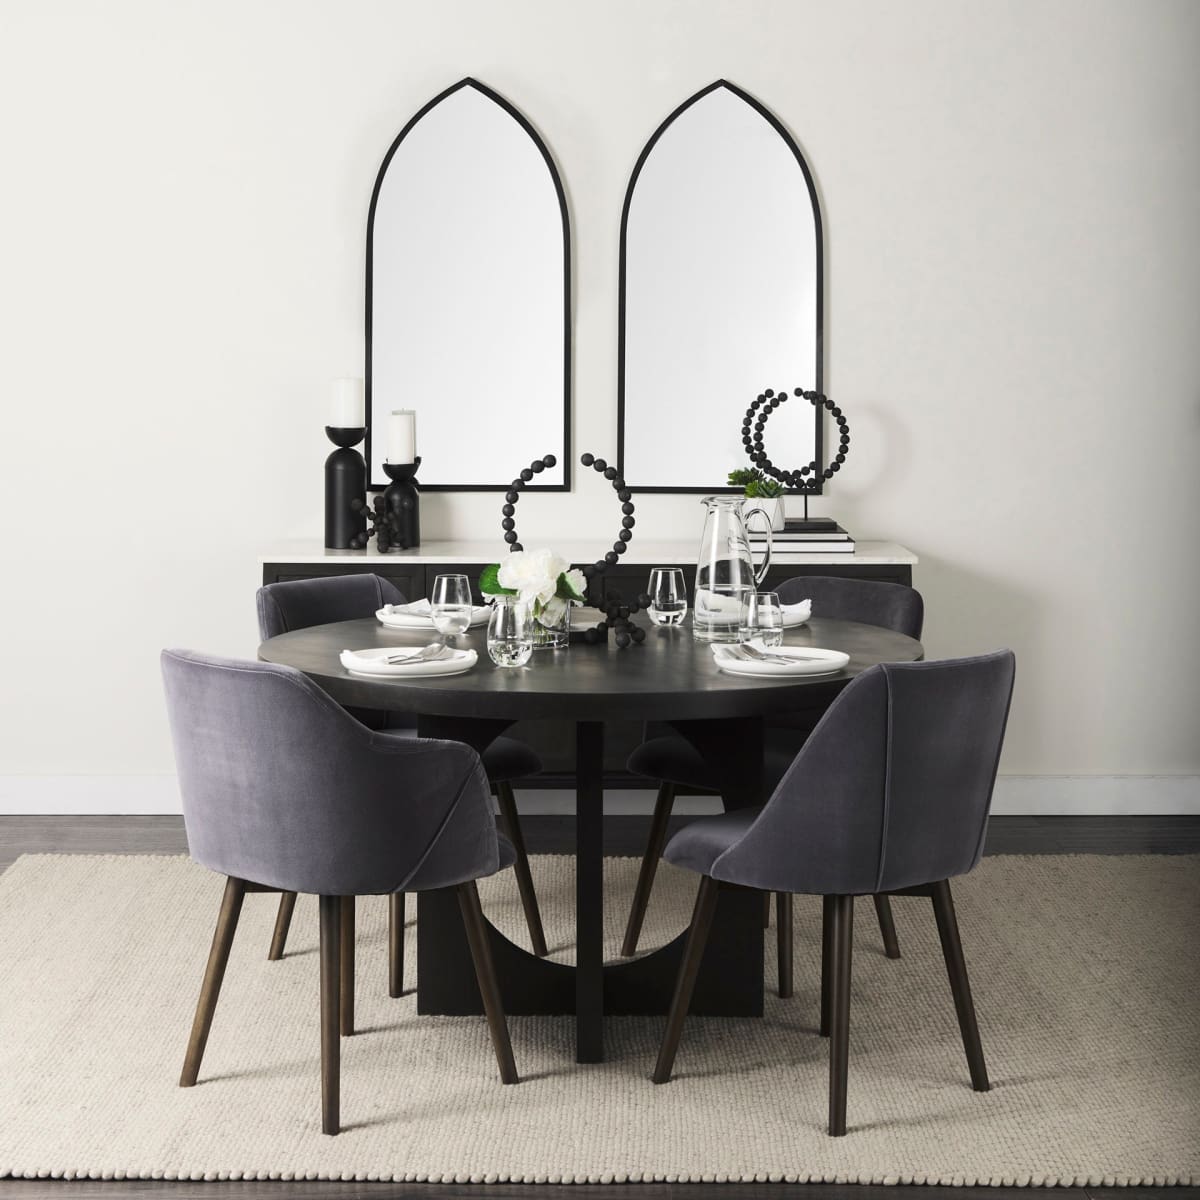 Giovanna Wall Mirror Black Metal | Pointed Arch - wall-mirrors-grouped